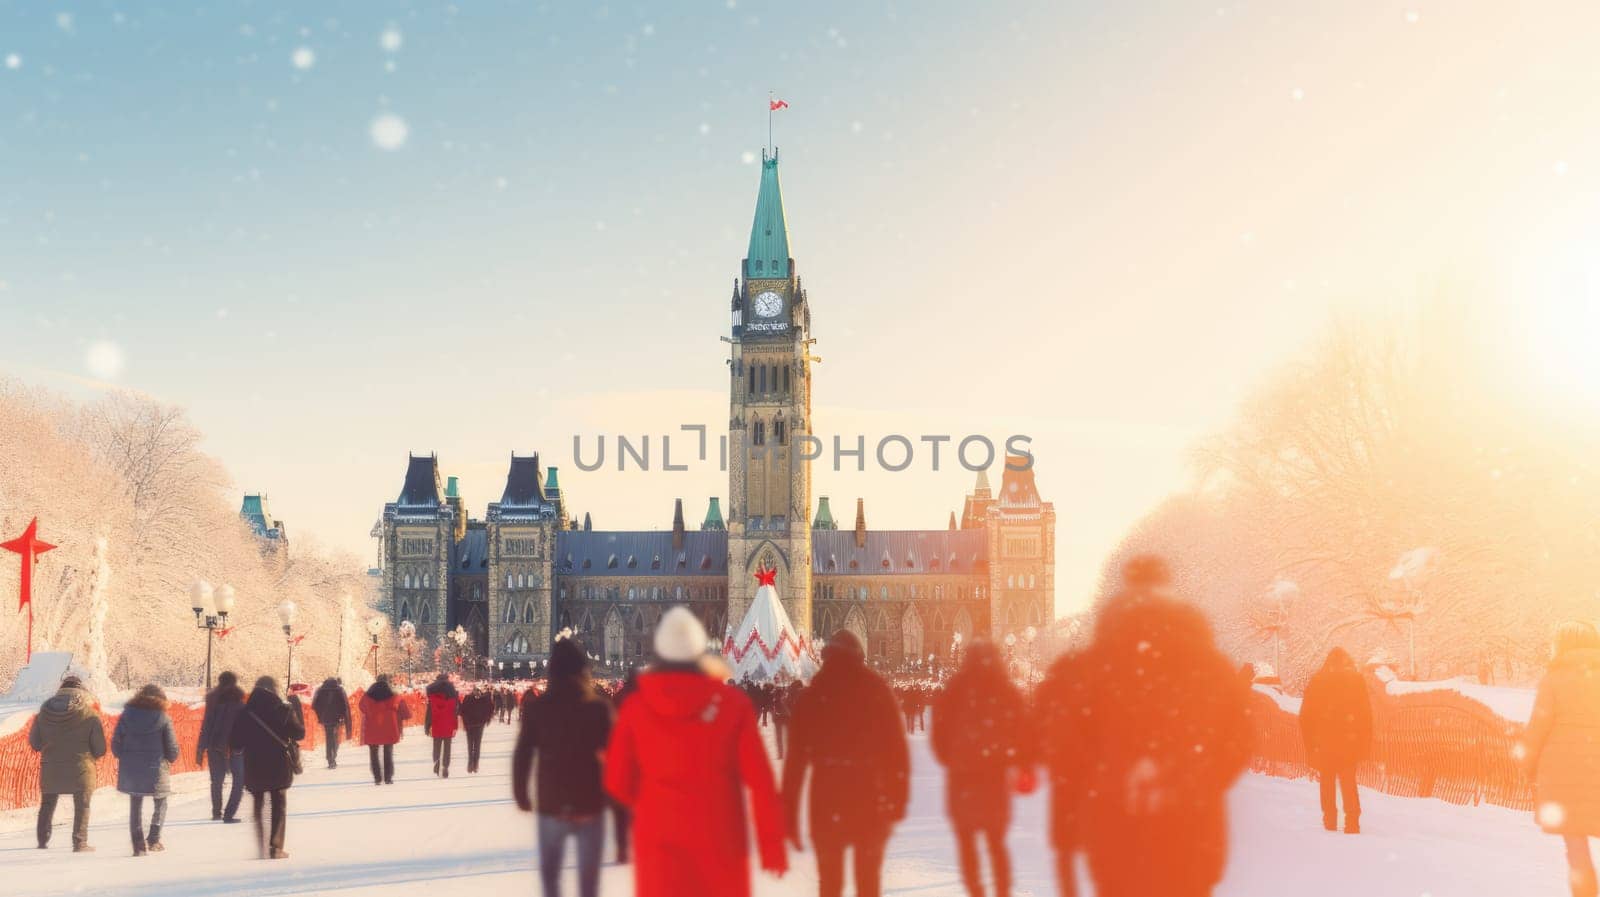 Happy Canadian wearing winter clothes celebrating Christmas holiday at Parliament Hill. People having fun hanging out together walking on city street. Winter holidays and relationship concept.